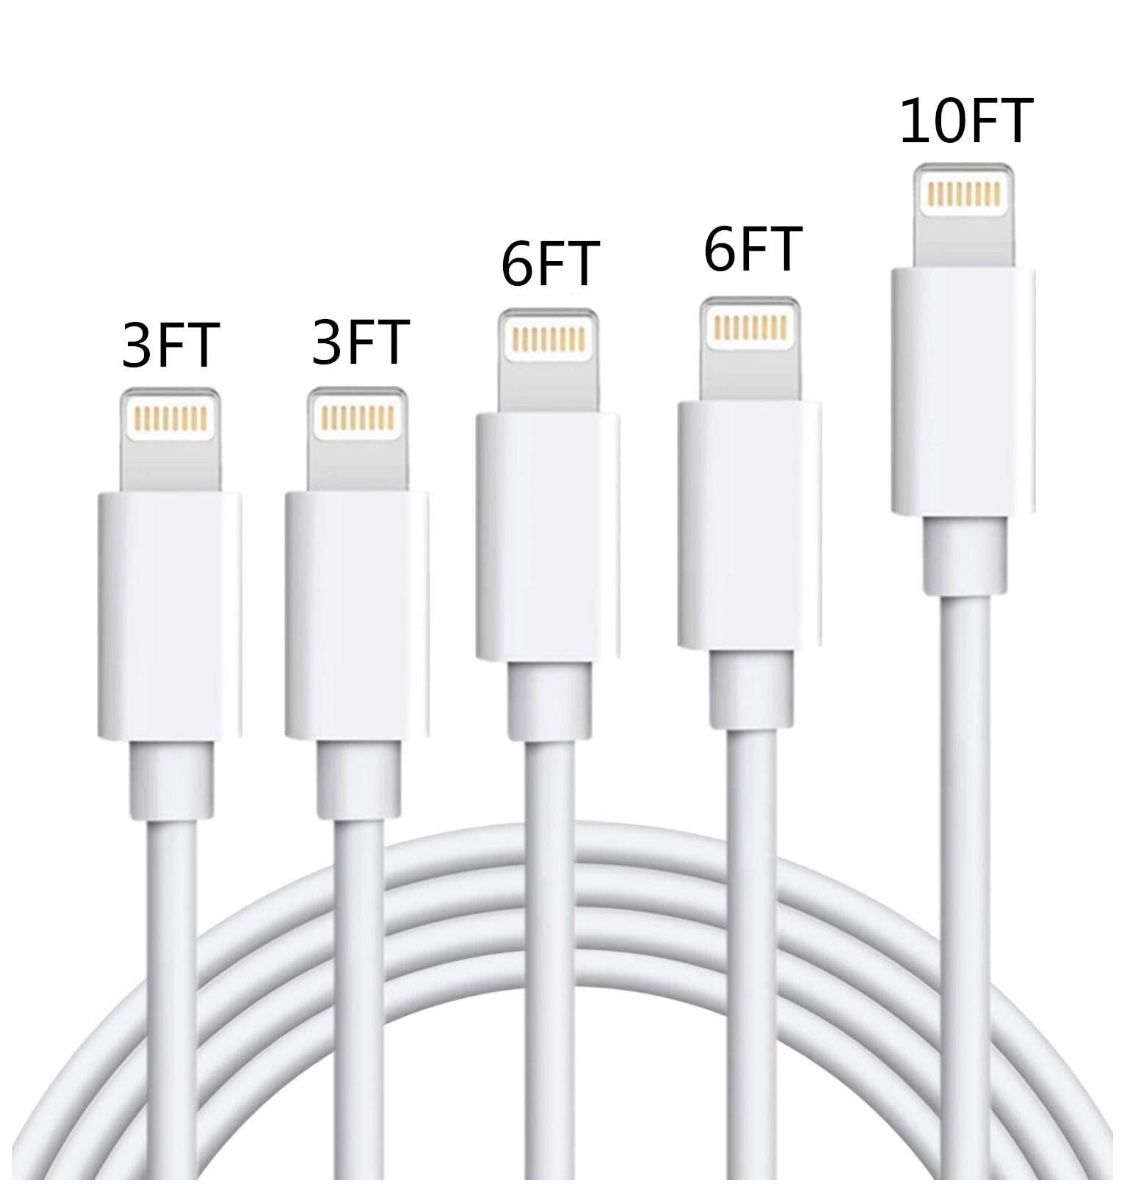 iPhone Charger Cable (5 Pack,3FT/6FT10FT)